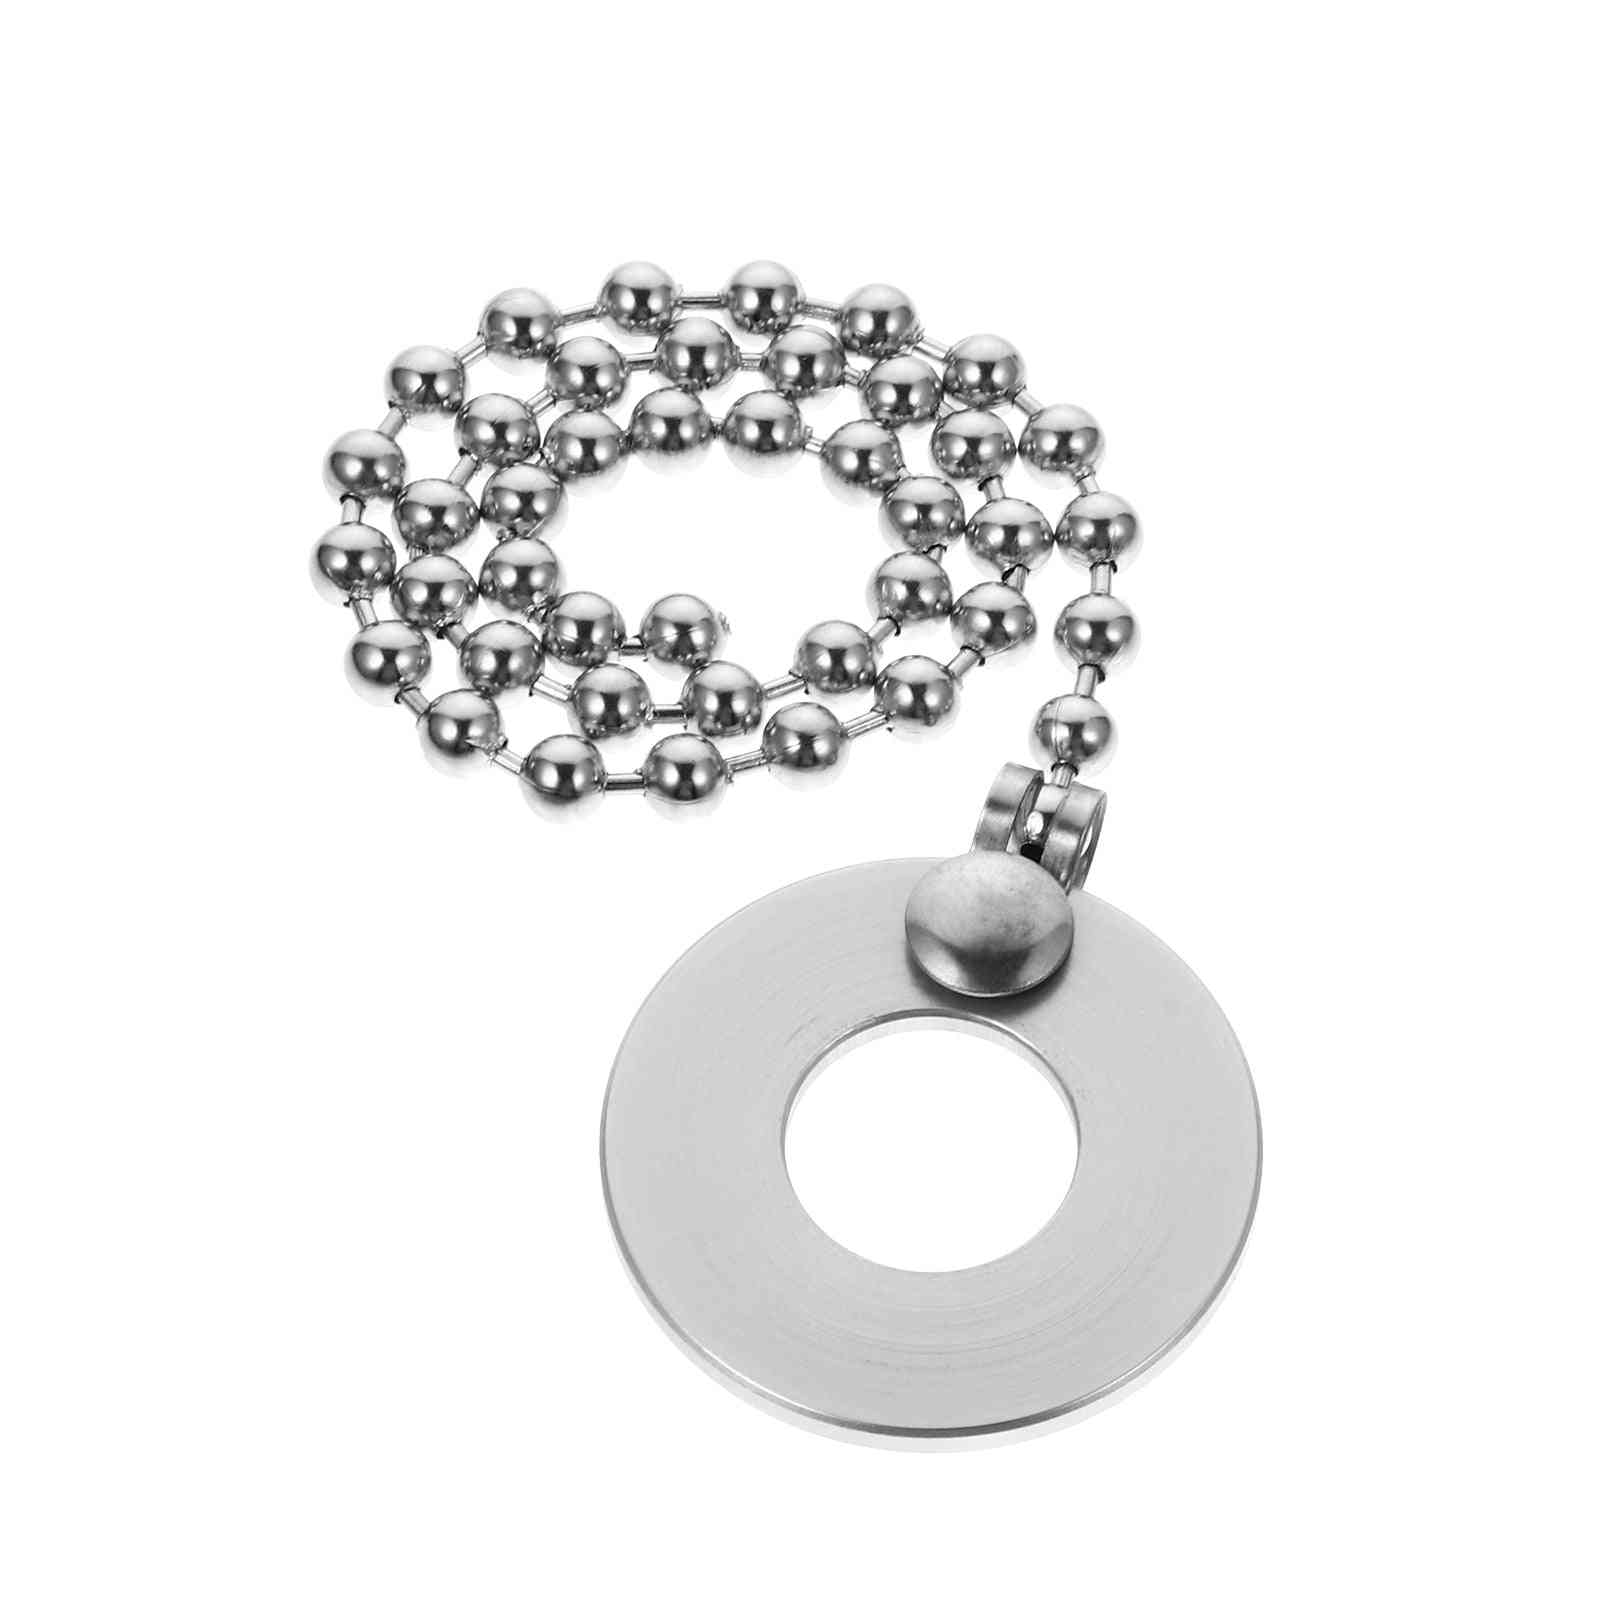 Aluminum Alloy Cymbal Extension Chain